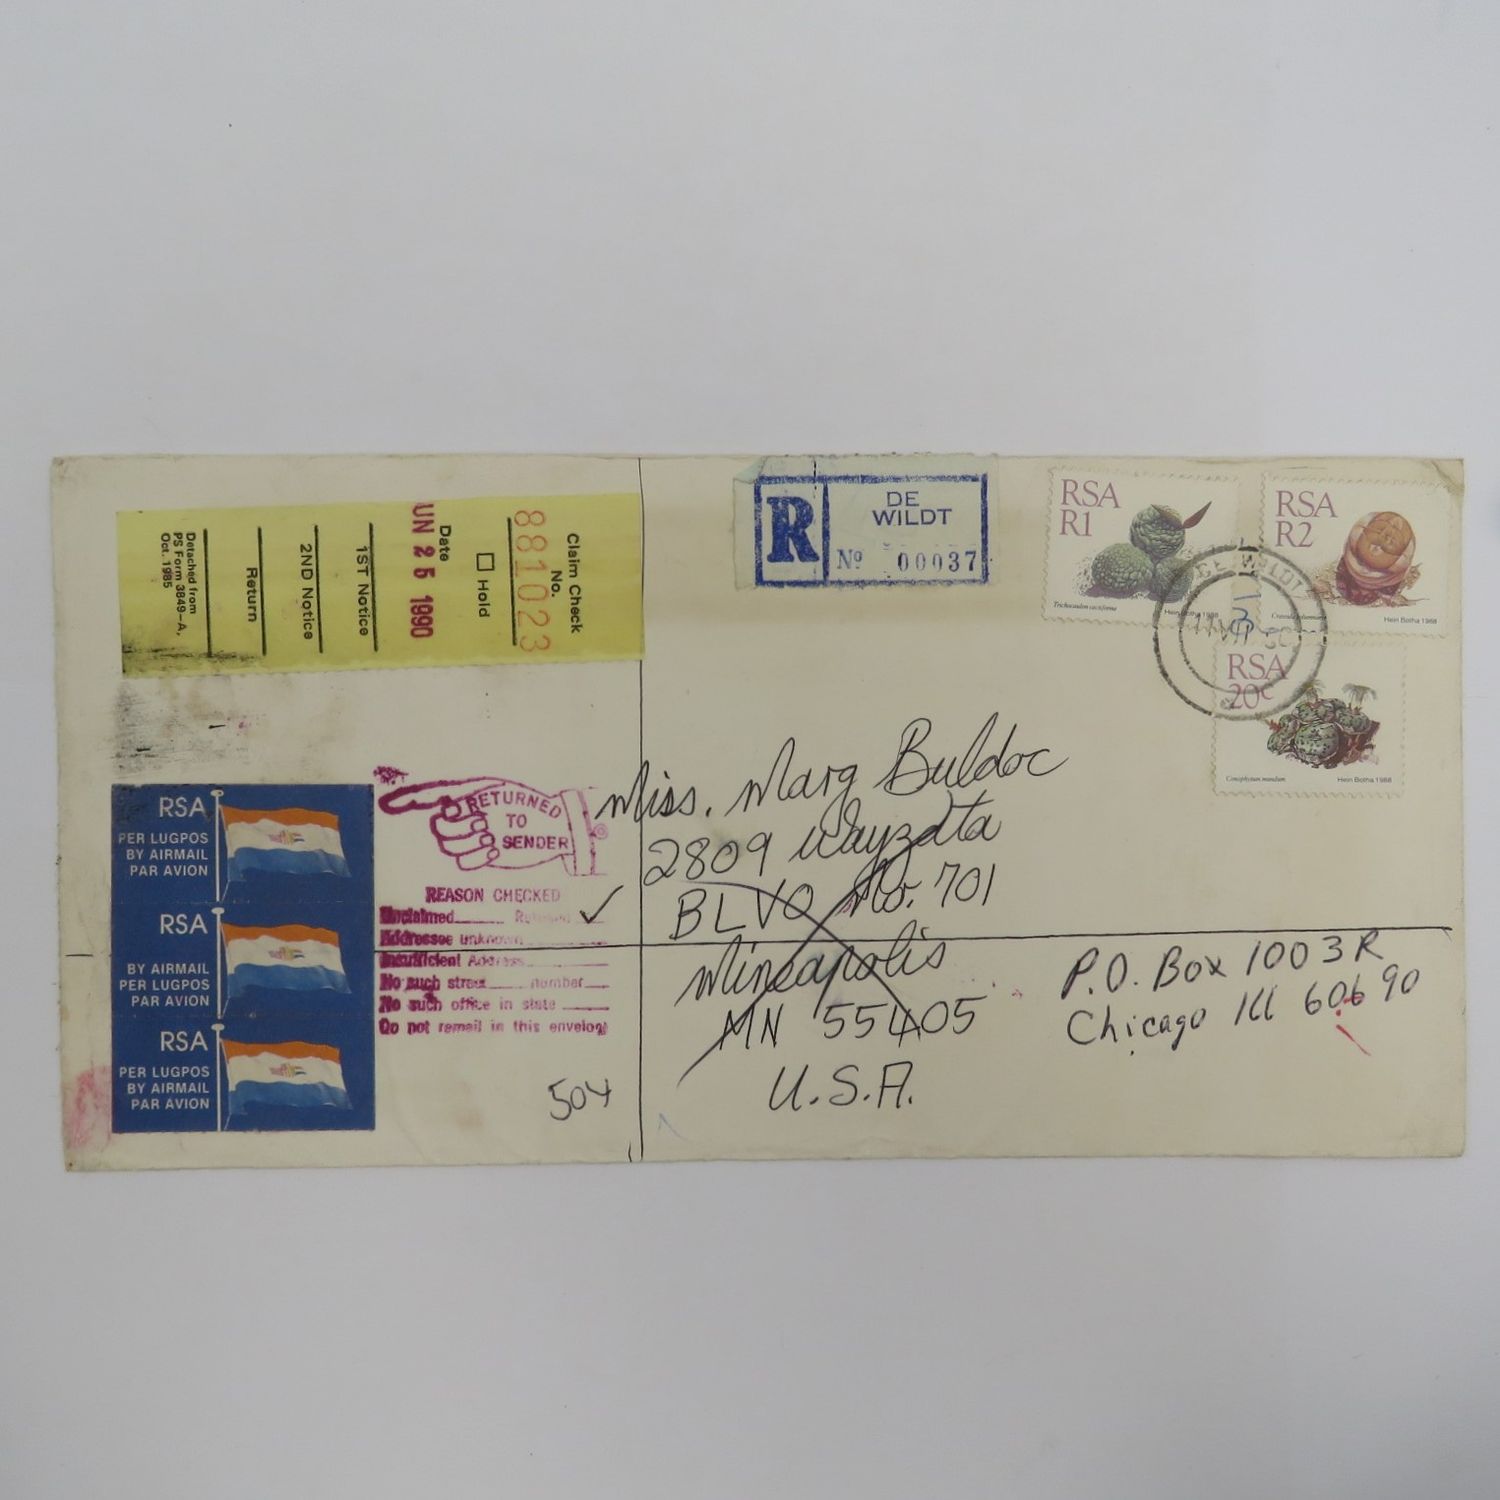 Postal cover from Dewildt, South Africa to Mineapolis, USA, the forwarded to Chicago, USA and returned to Sender in Brits, South Africa - with 3 RSA stamps and 3 airmail labels, return to sender rubbe